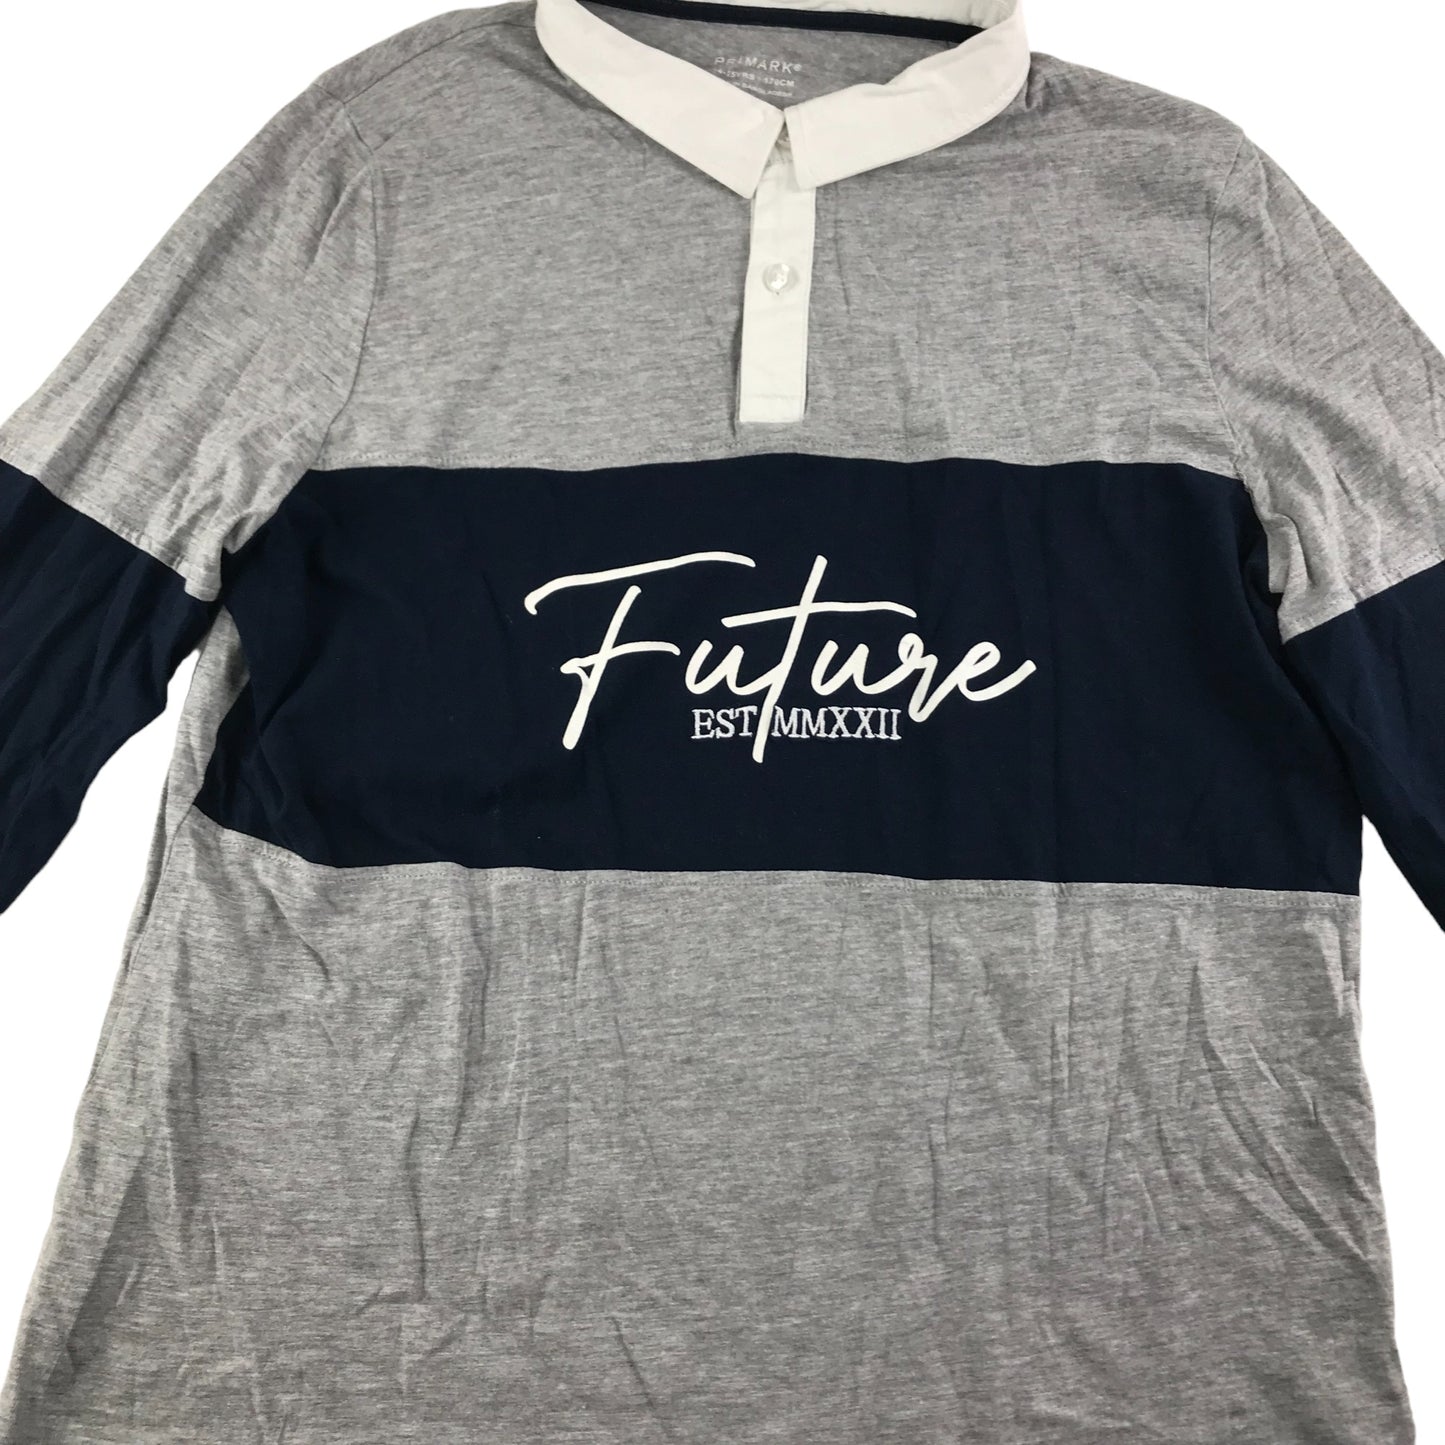 Primark Polo Shirt Age 14 Grey Long Sleeve Future Text Graphic